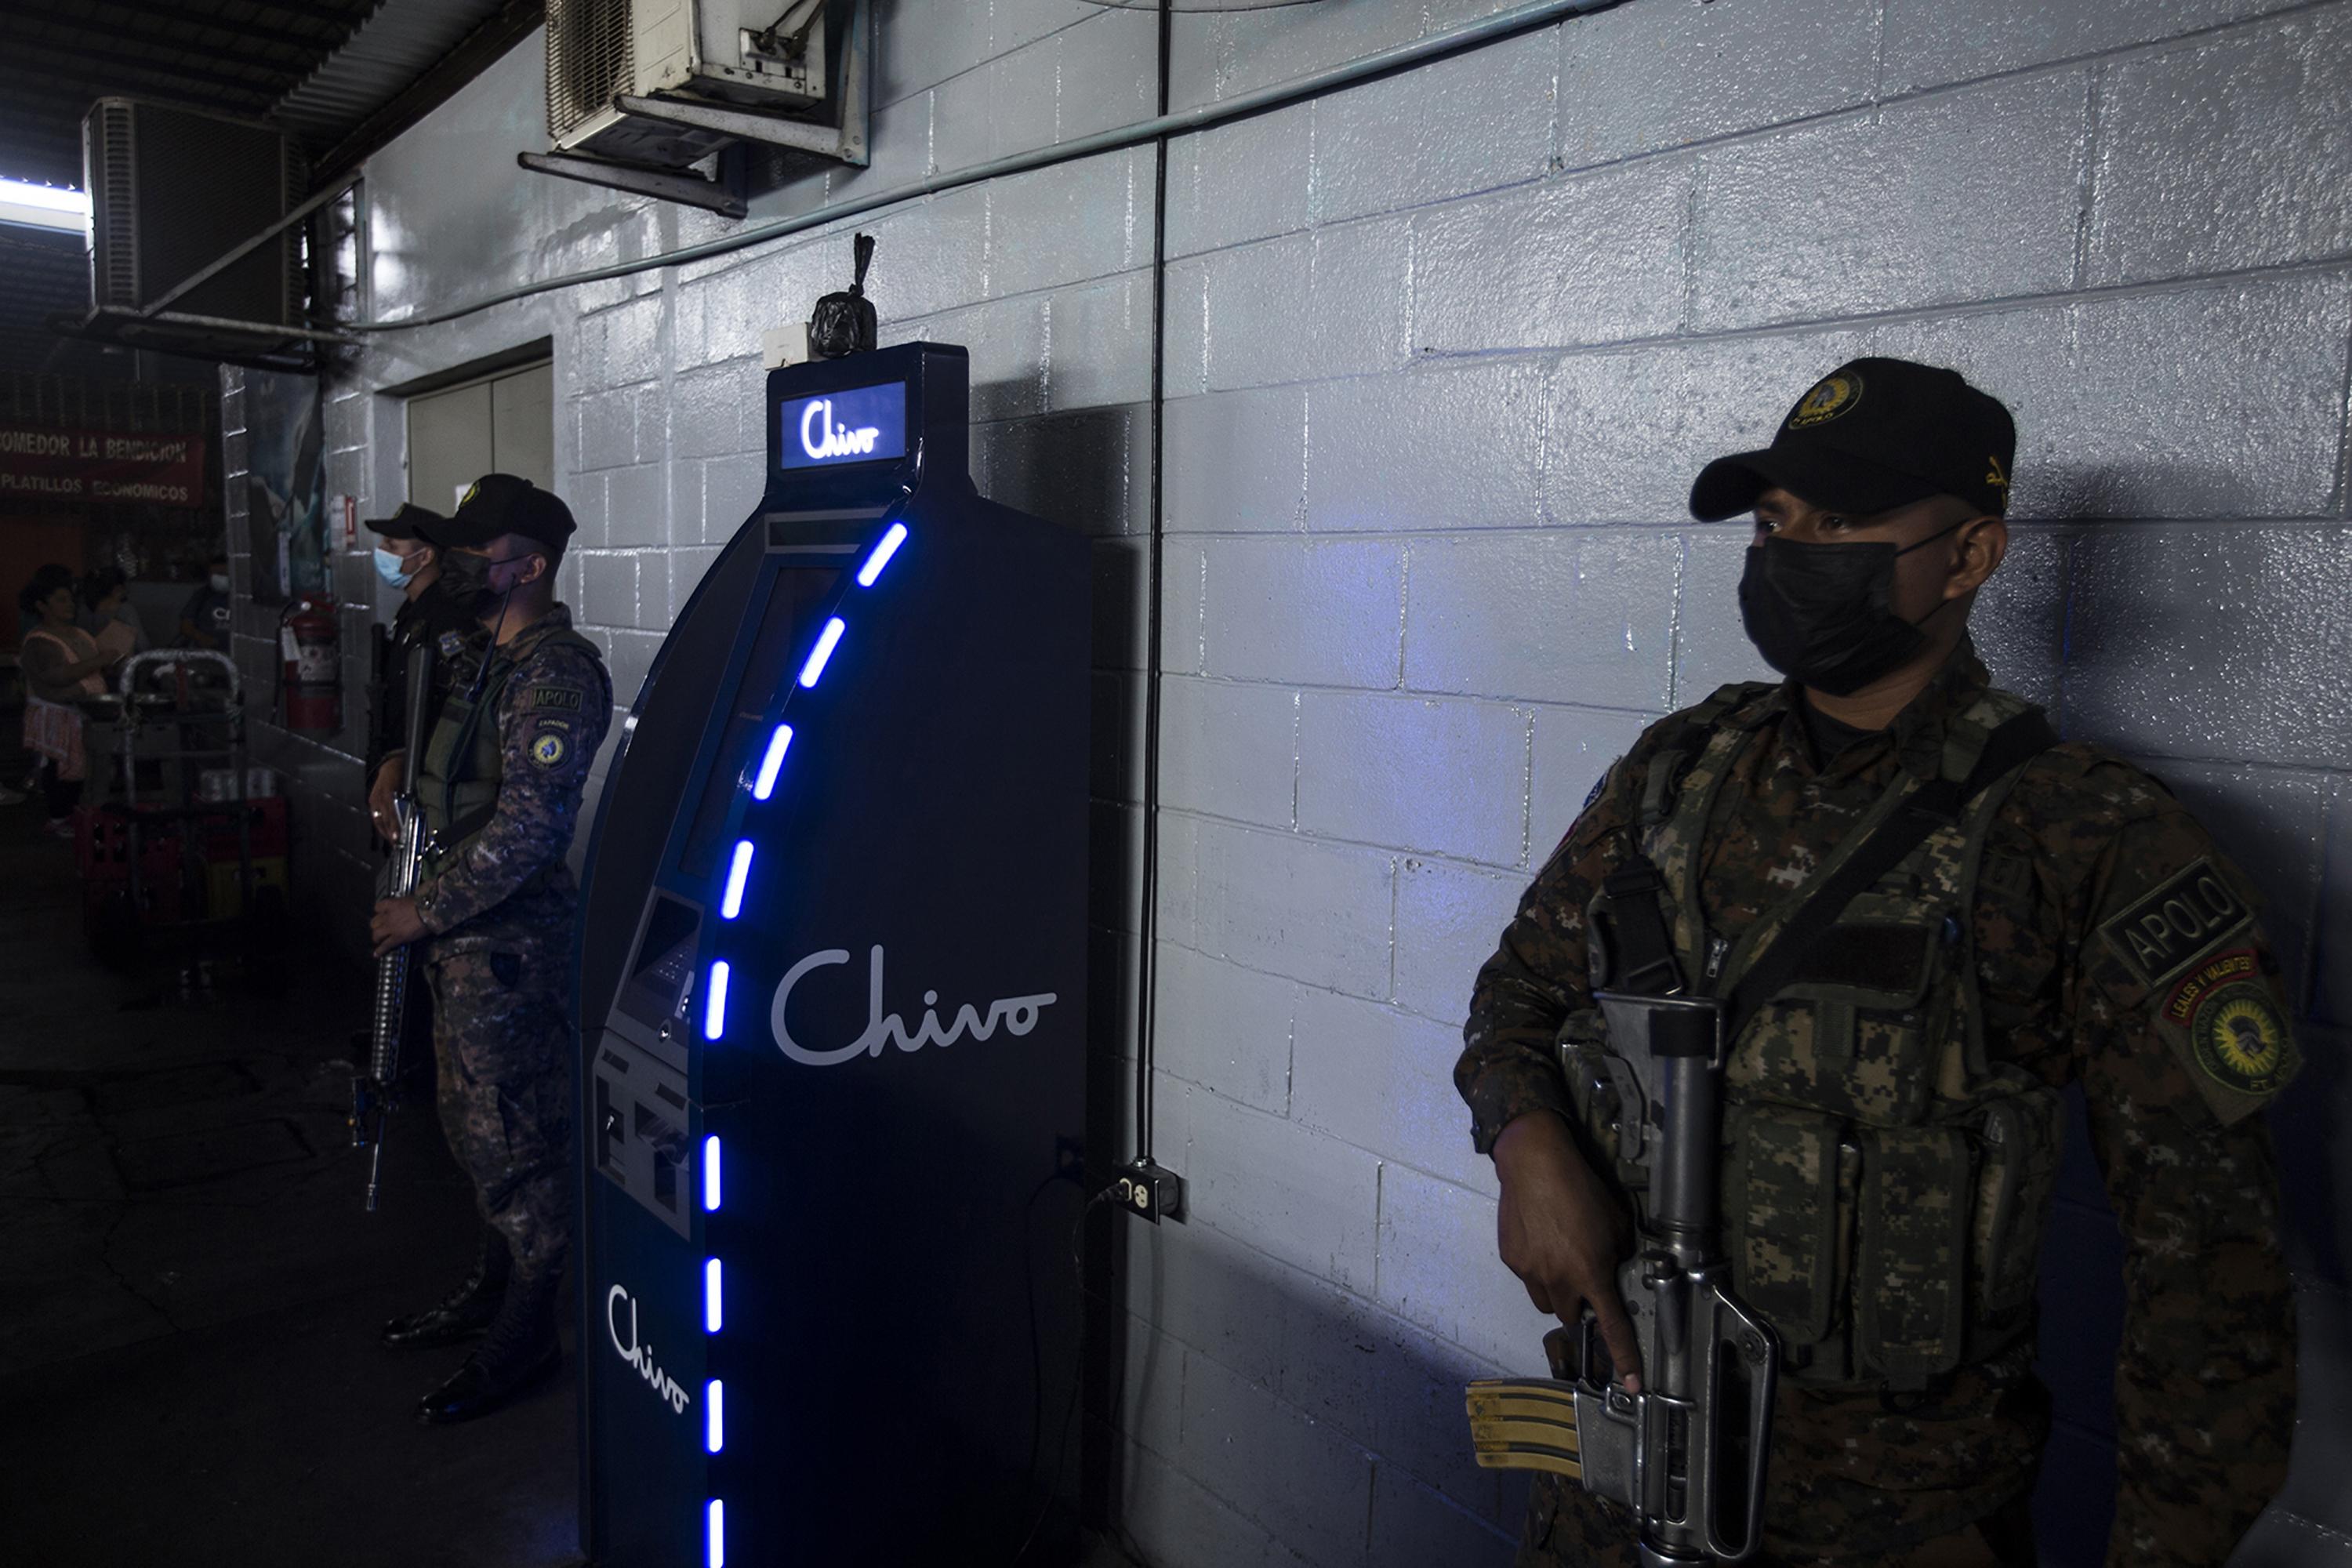 Chivo, a publicly funded private business, began installing bitcoin ATMs in El Salvador in August 2021. The government dispatched the military and police throughout the country to stand guard over the new machines, like this one in the municipal market in Santa Tecla, La Libertad. Photo Víctor Peña